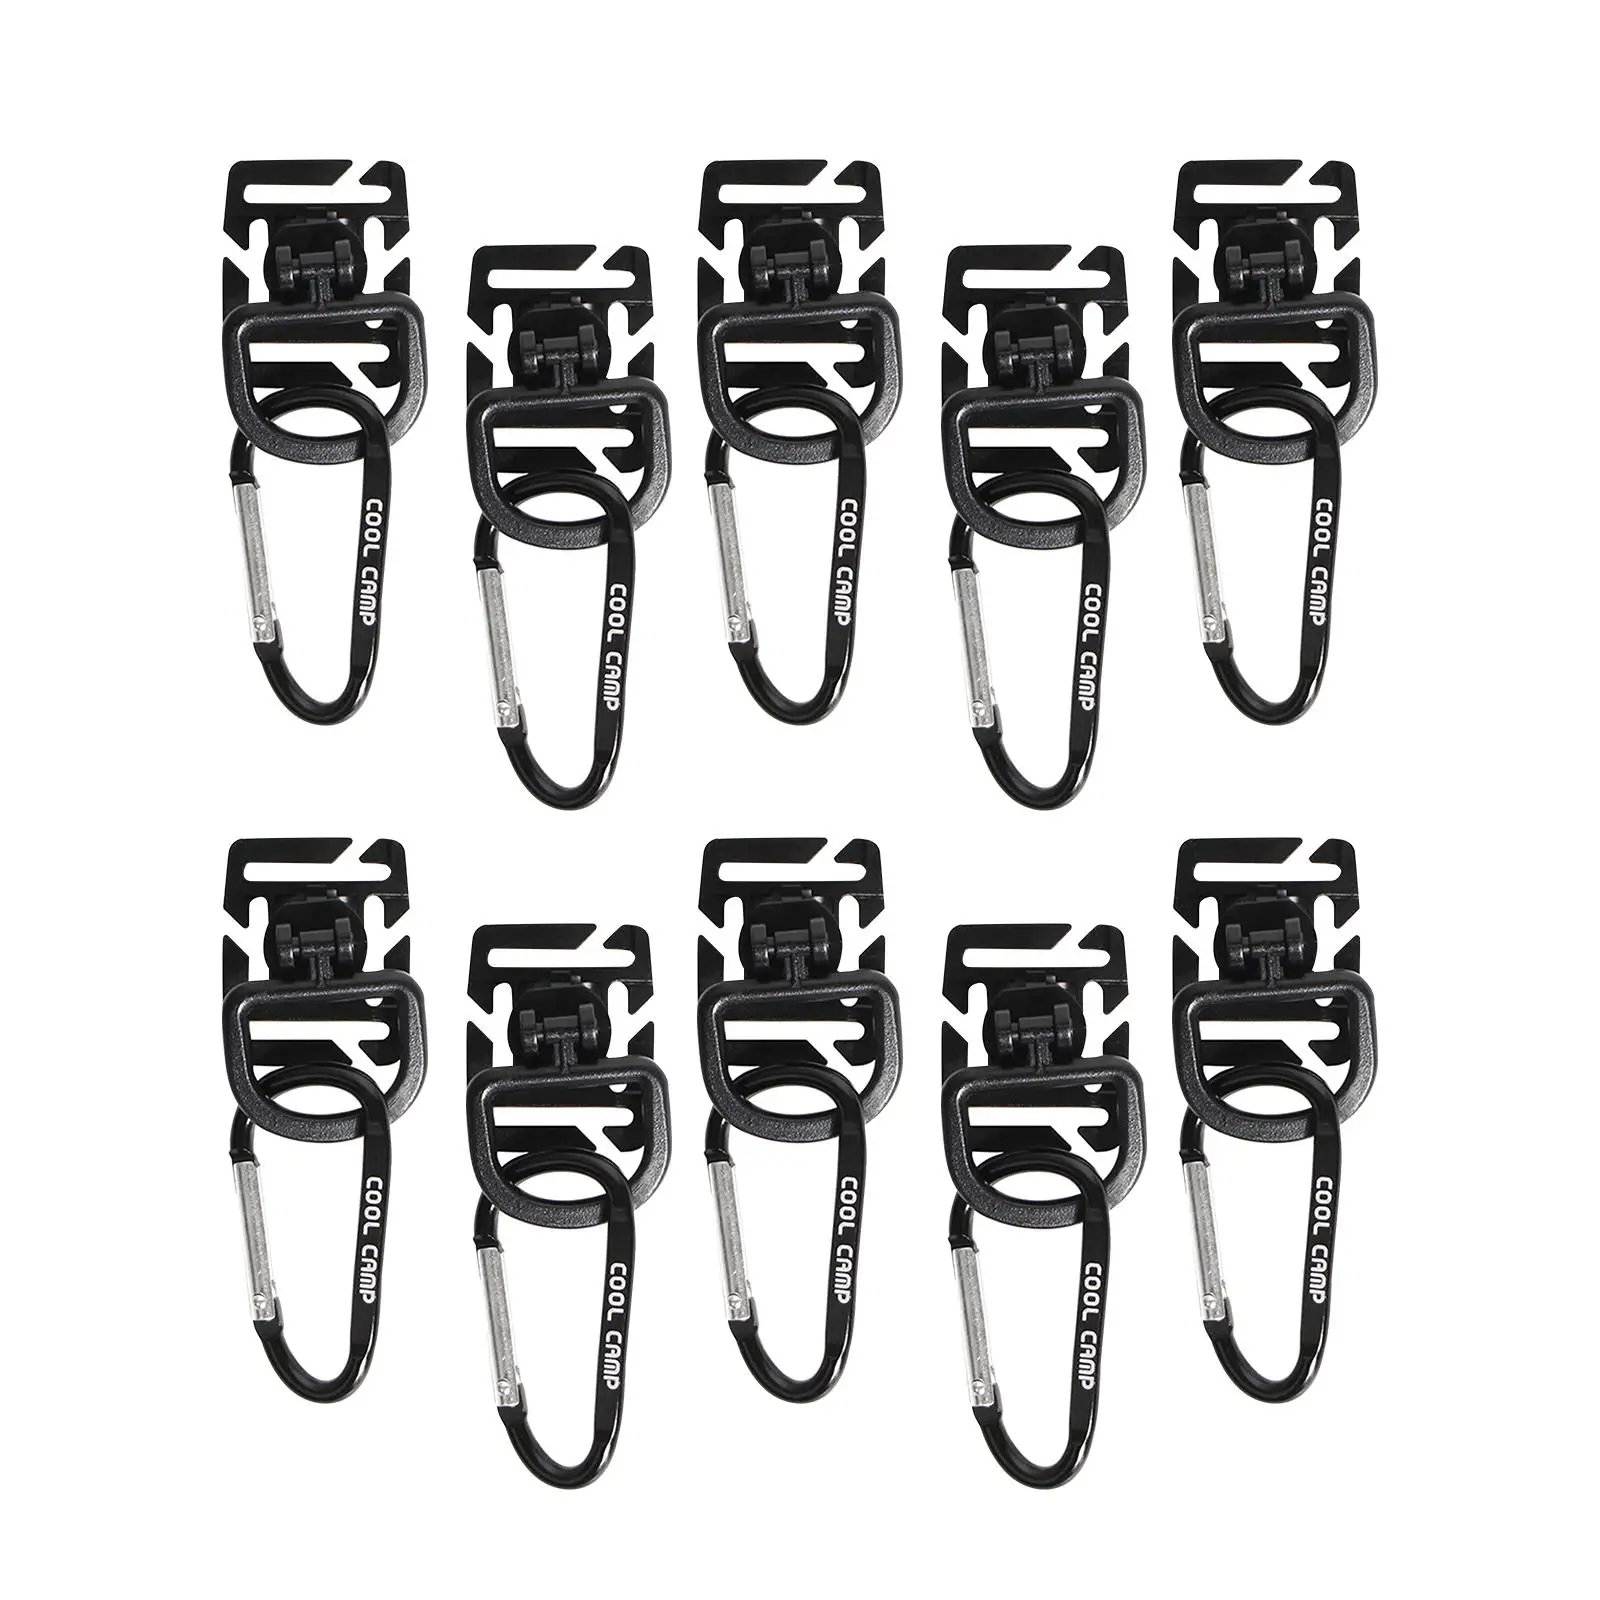 10x Outdoor Tent Clips Hook Tent Clamp Heavy Duty Carabiner Hook Canopy Clip for Mountaineering Camping Climbing Canopies Garden